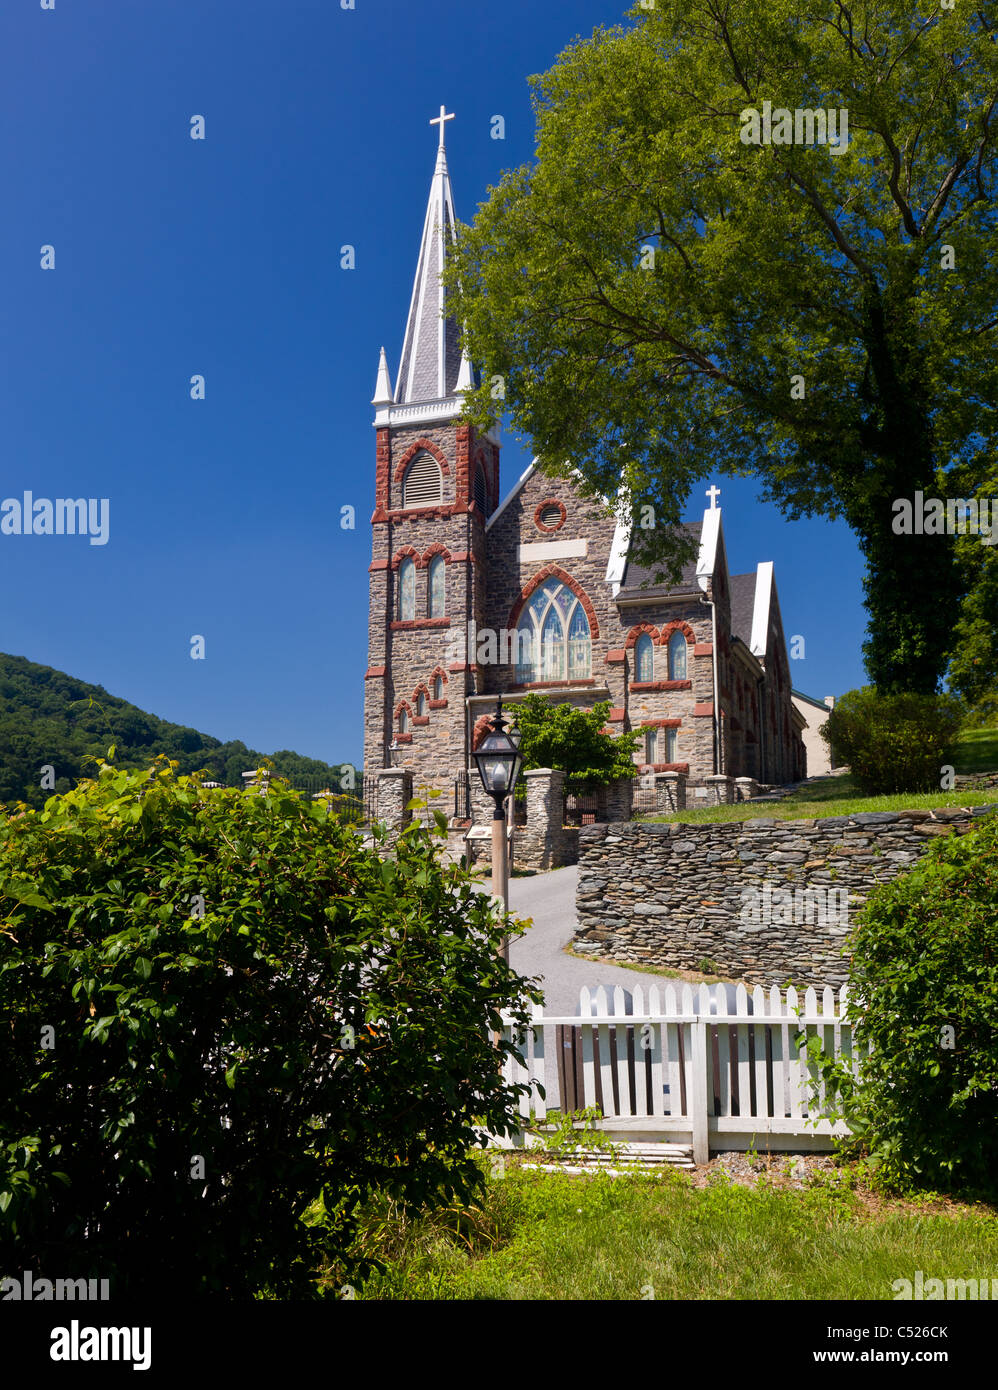 National Park Service owns and operates the historic Civil War town of Harpers Ferry Stock Photo